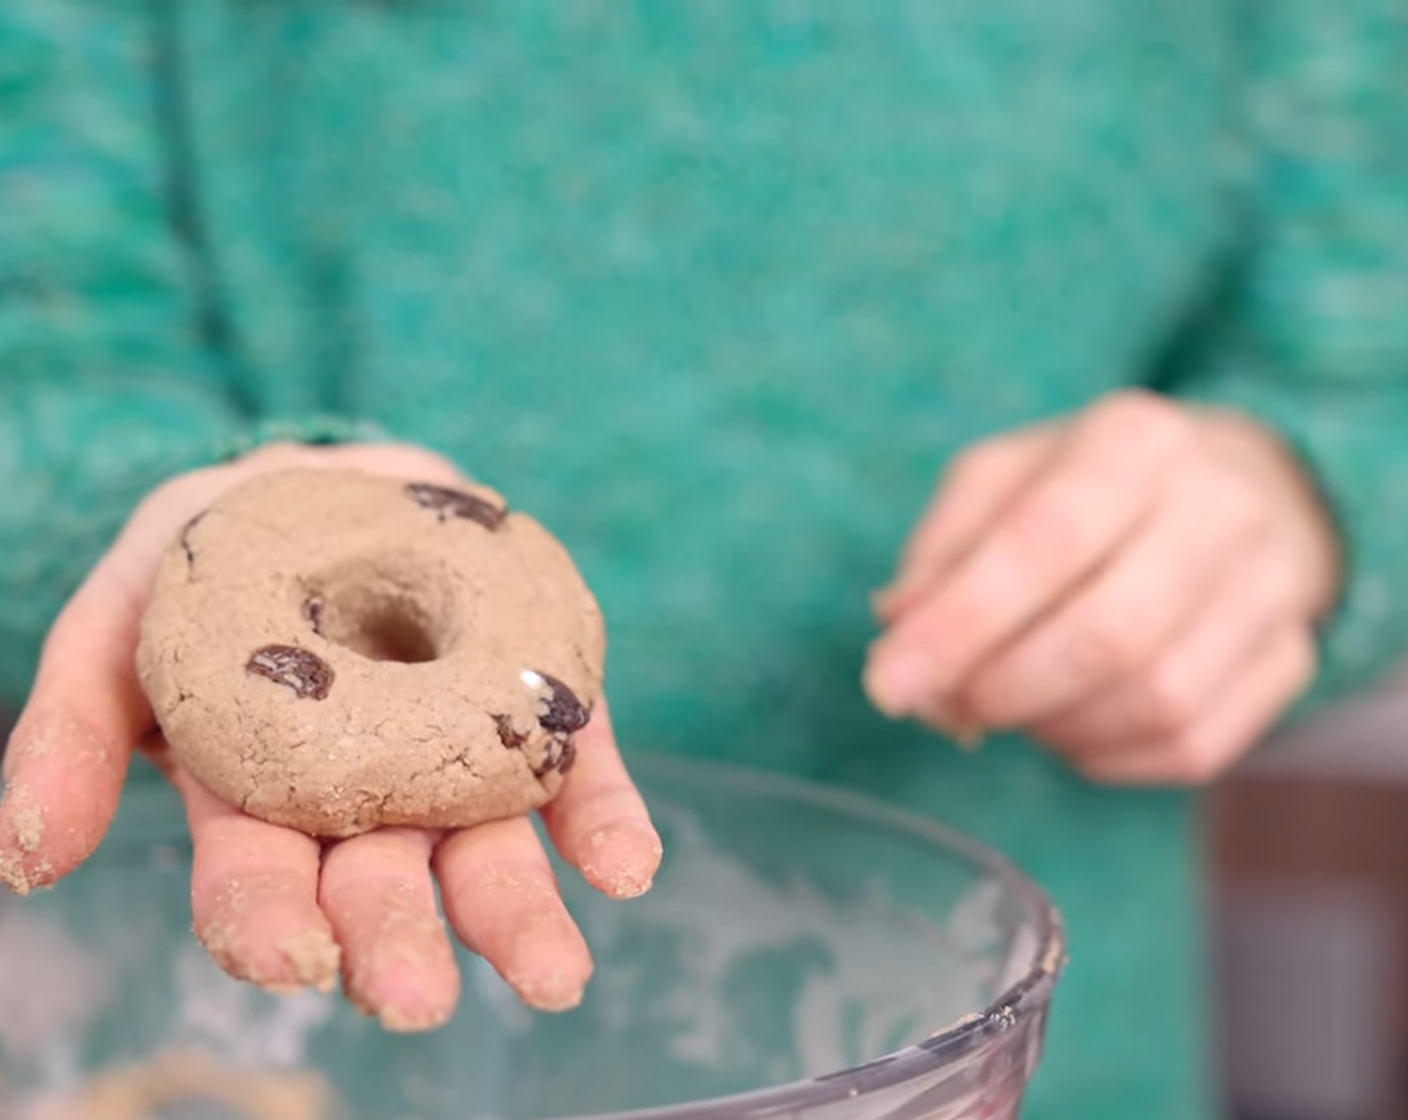 step 6 Divide dough into 4 and form into a ball slightly larger than a golf ball. Form into a bagel by flattening the ball slightly and poking a hole through with your finger.